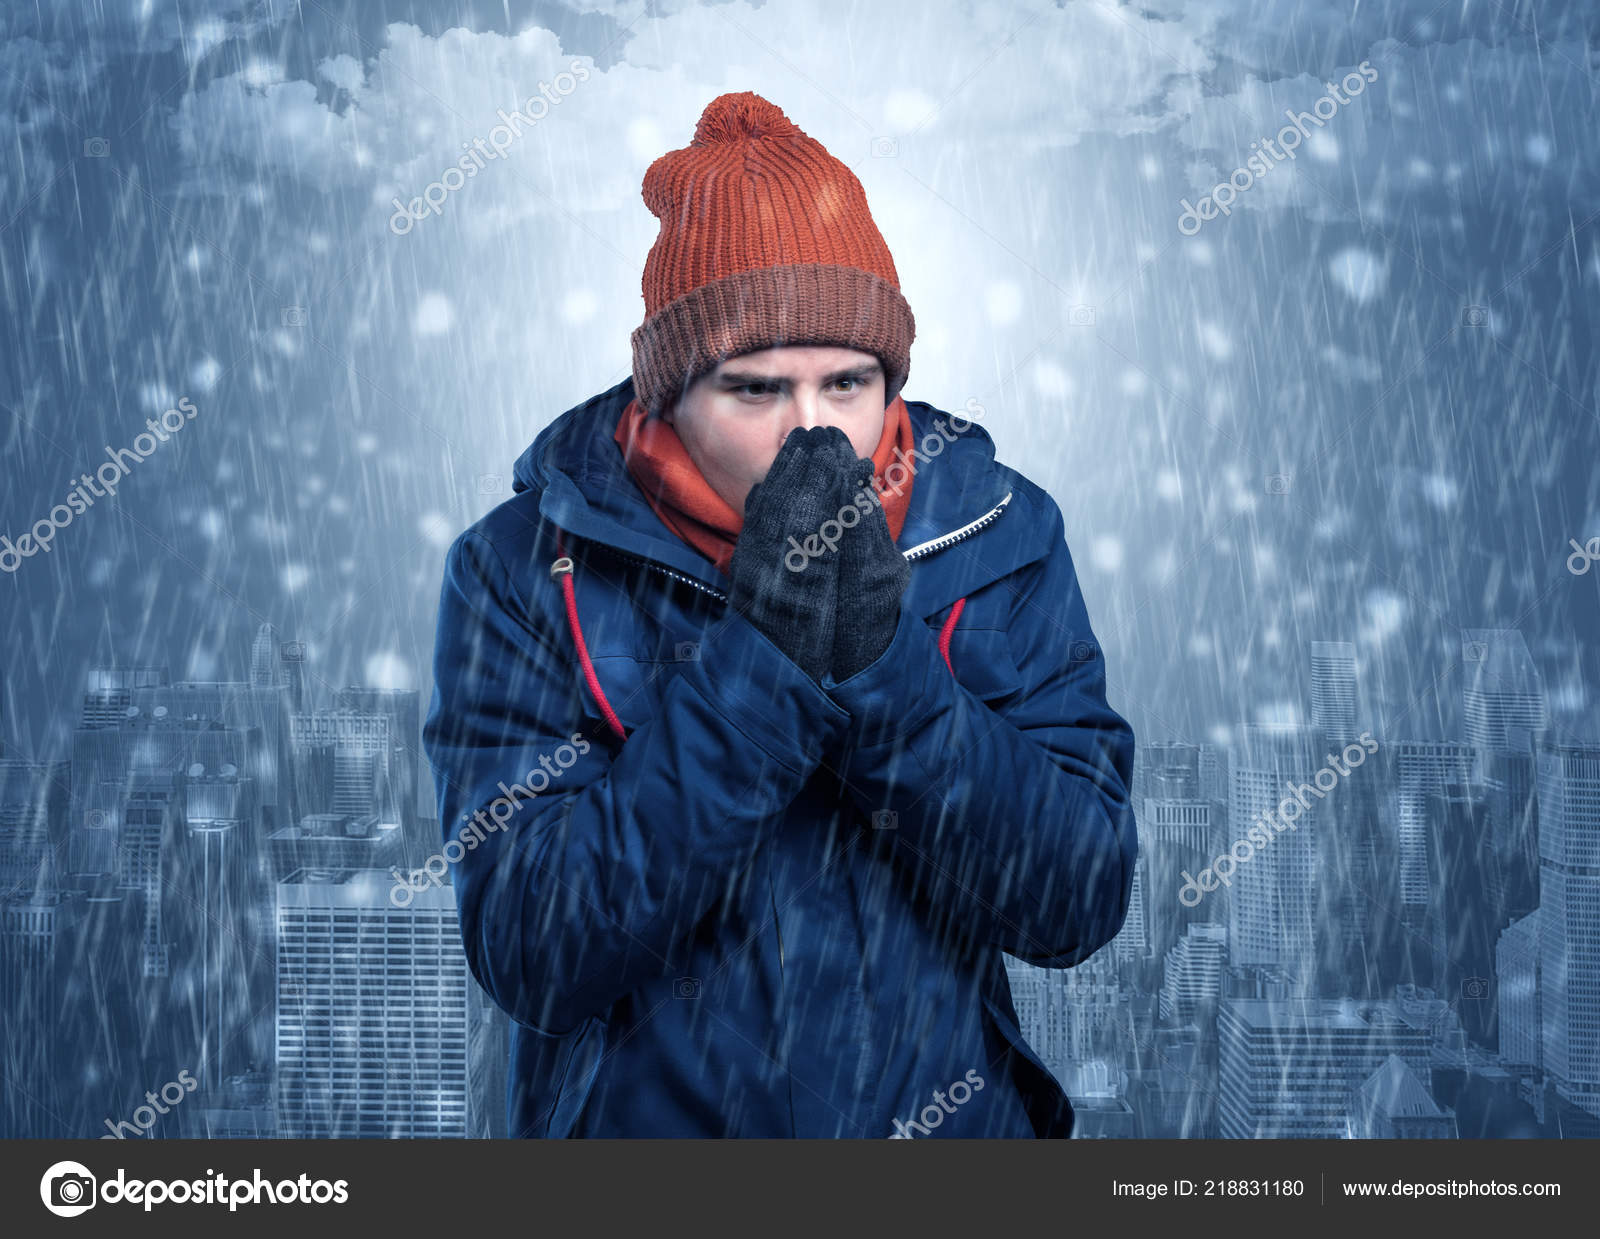 171,887 Cold Weather Clothes Royalty-Free Photos and Stock Images